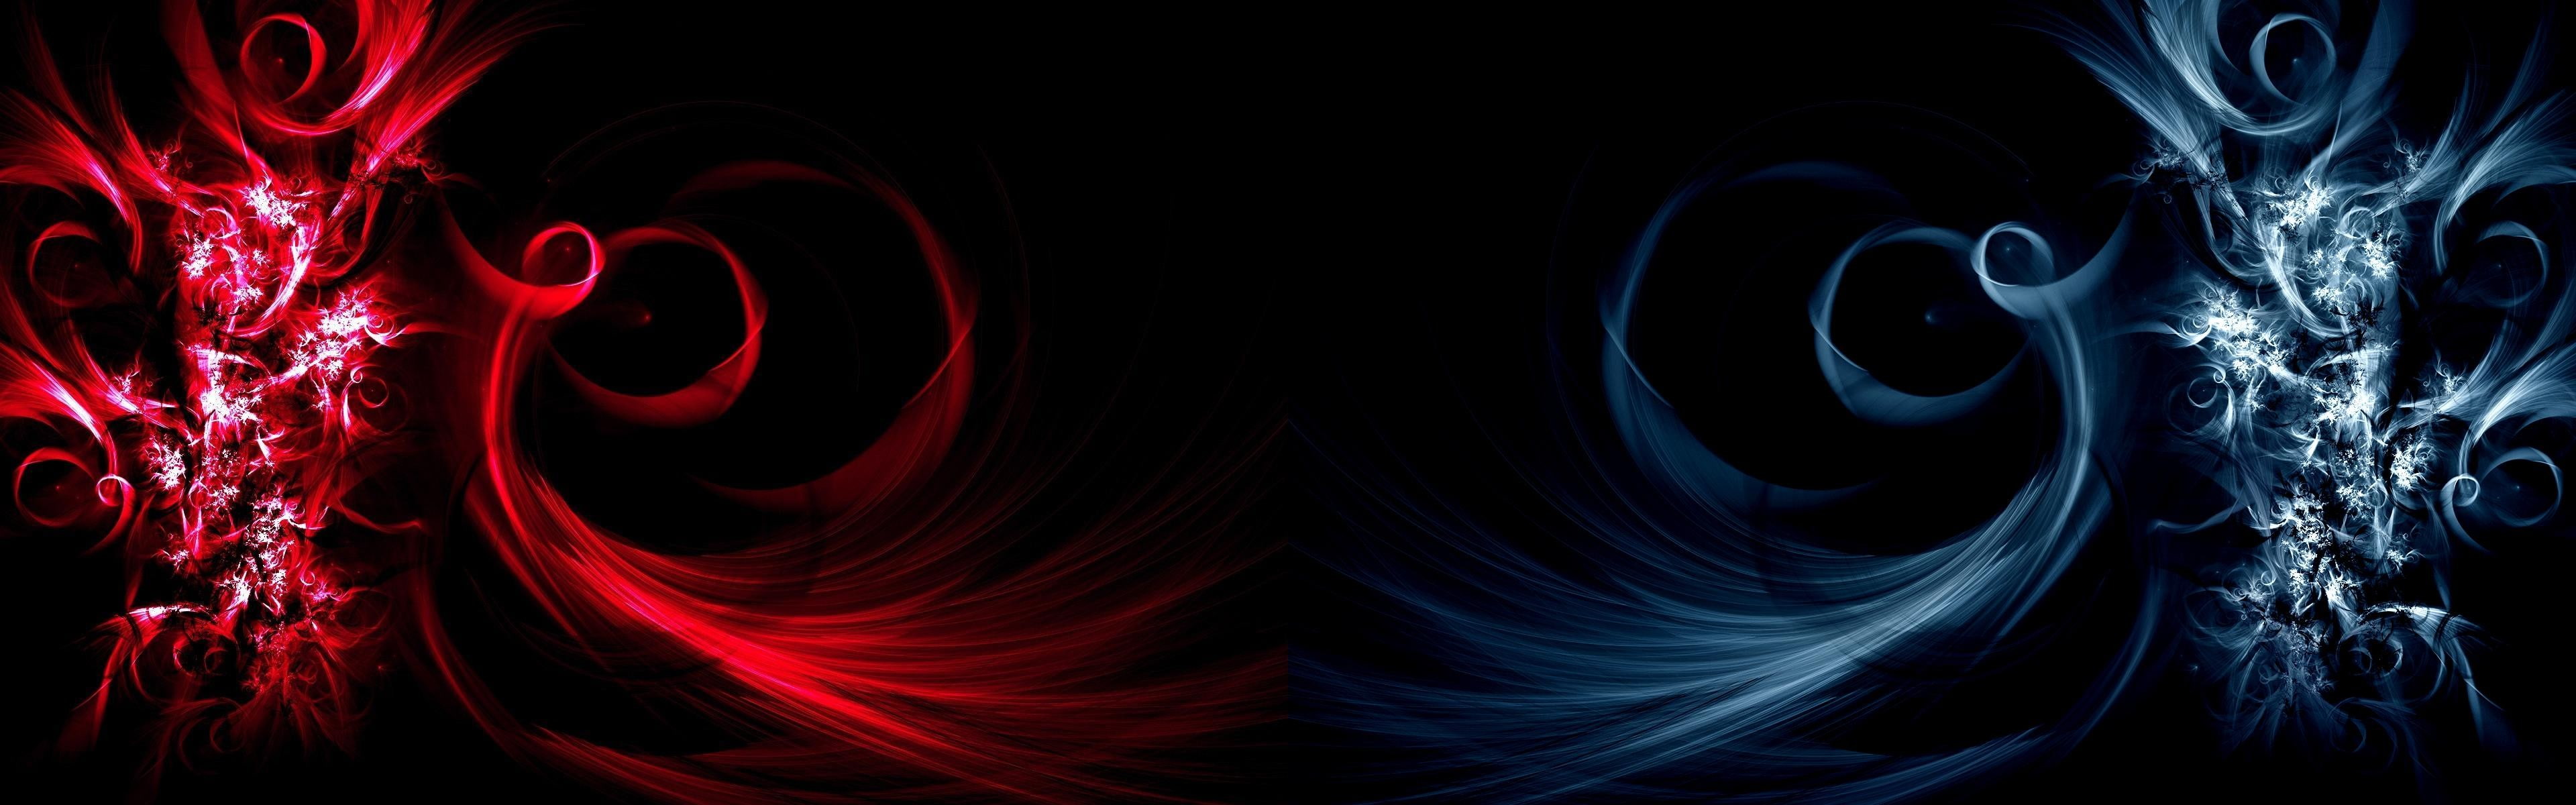 digital art, fire, ice, abstract, shape, motion, red, black background